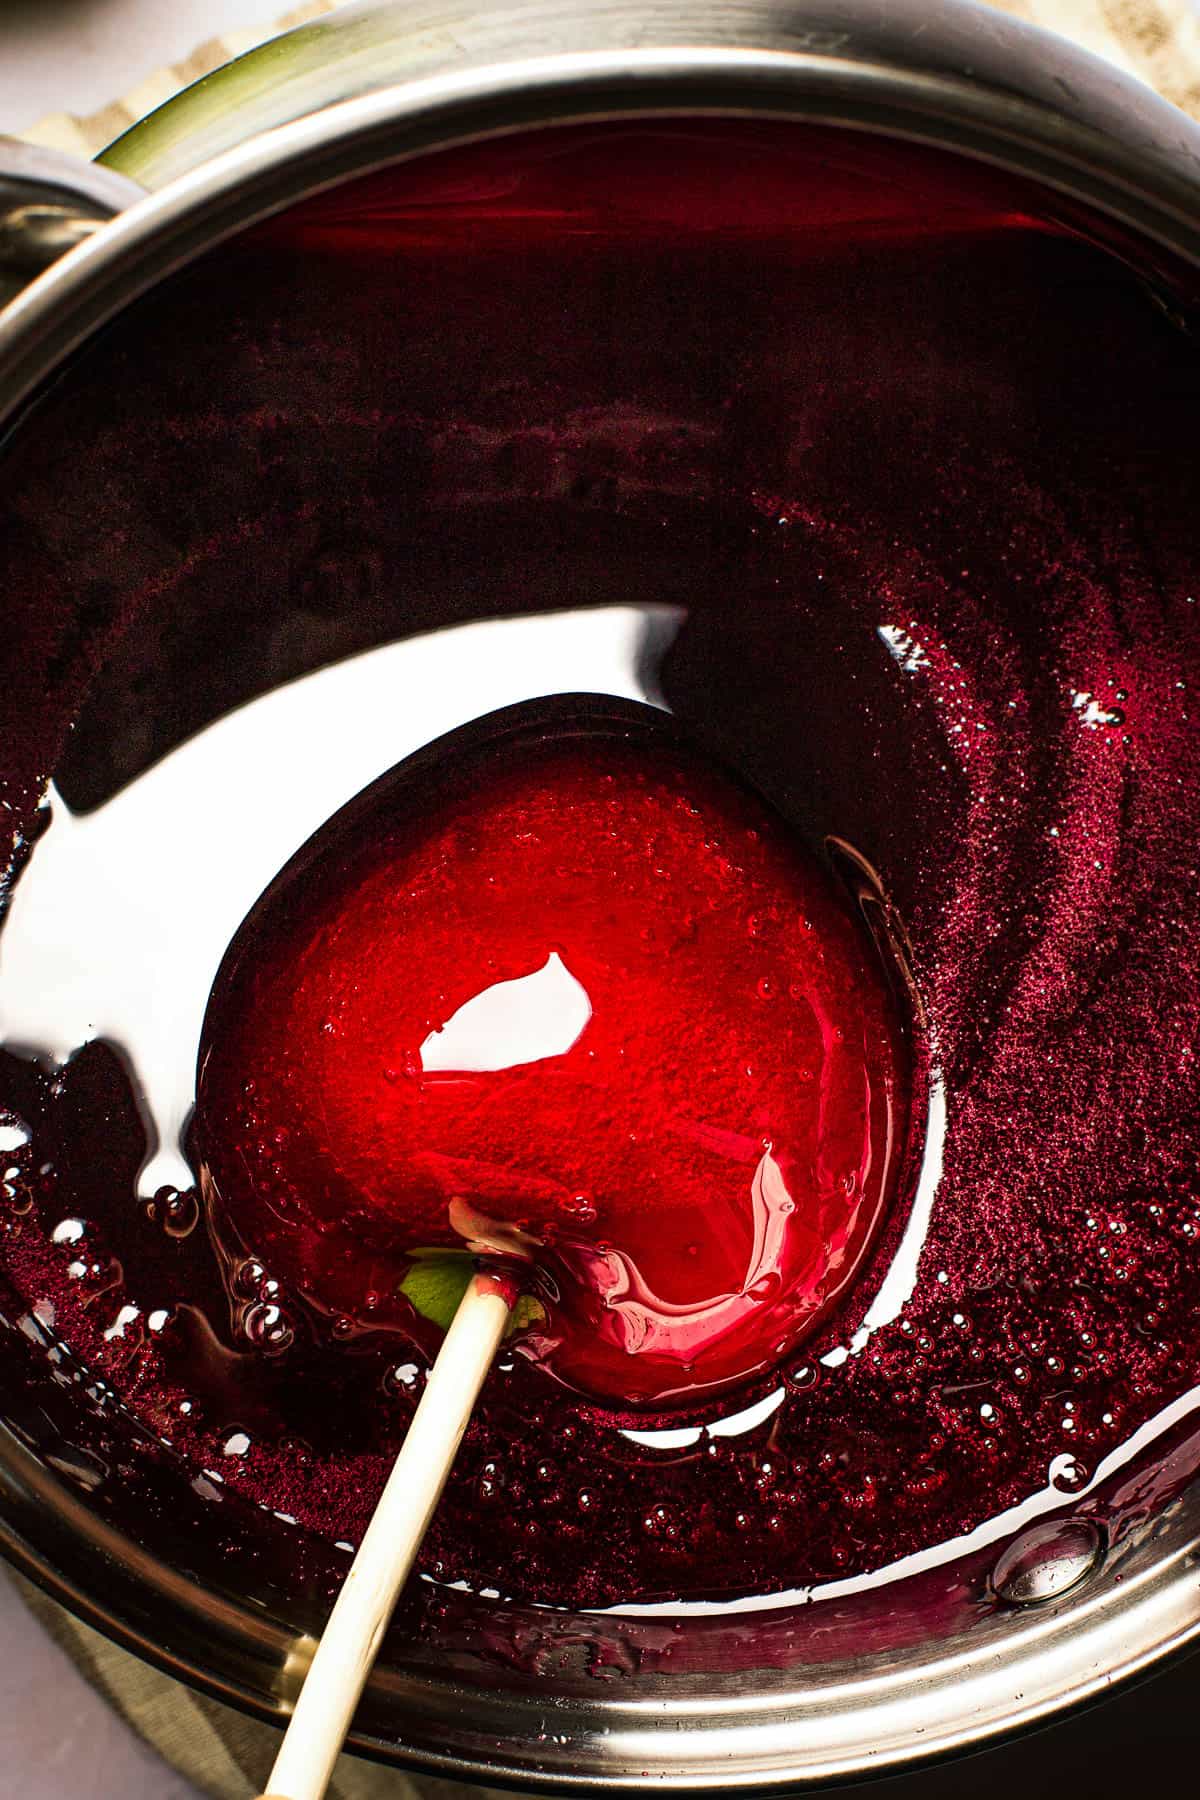 An apple coated in red candy is being lifted from a saucepan of the candy mixture.